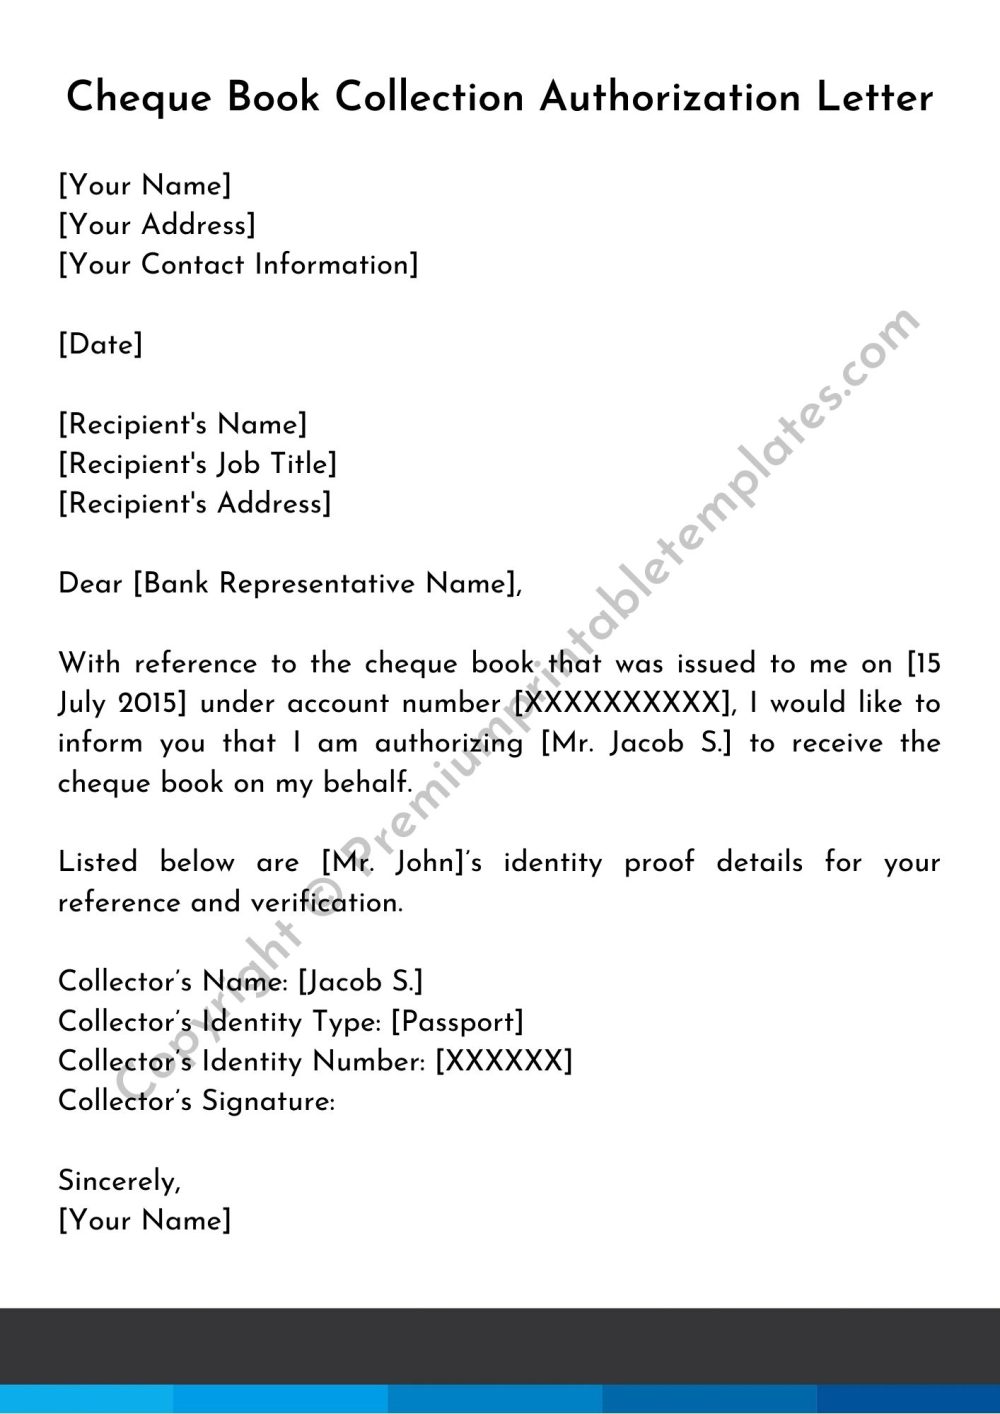 Printable Cheque Book Collection Authorization Letter